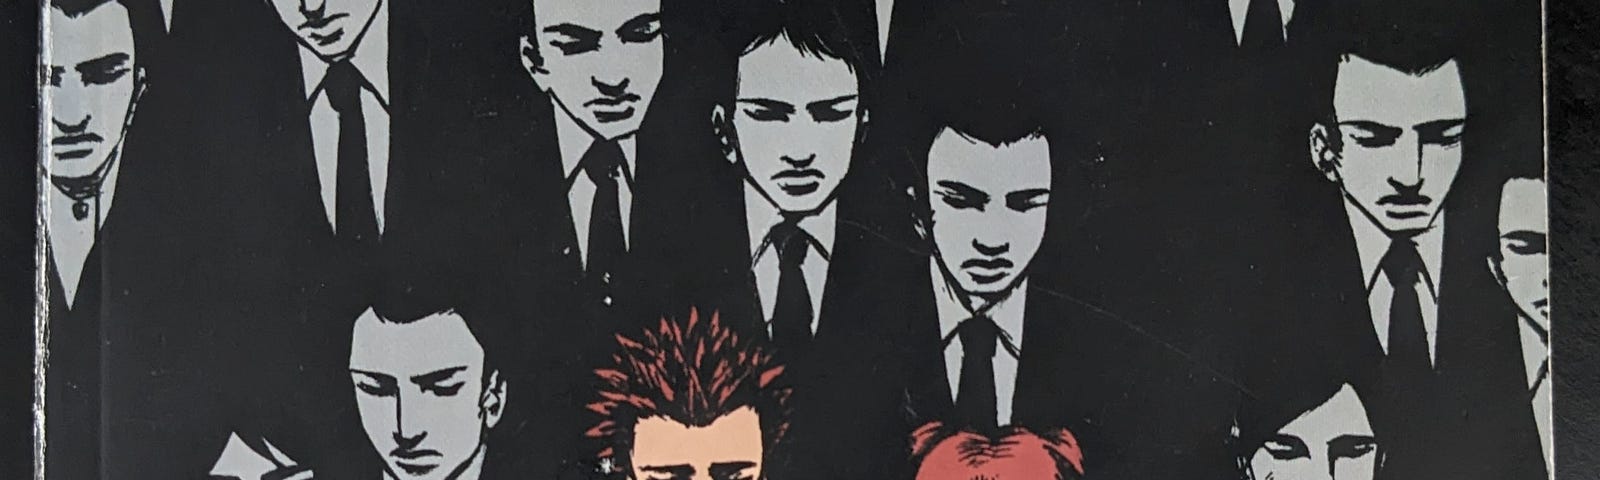 The cover of Demo by Brian Wood and Becky Cloonan. A young couple in red shirts walks together in a crowd of black and white figures.